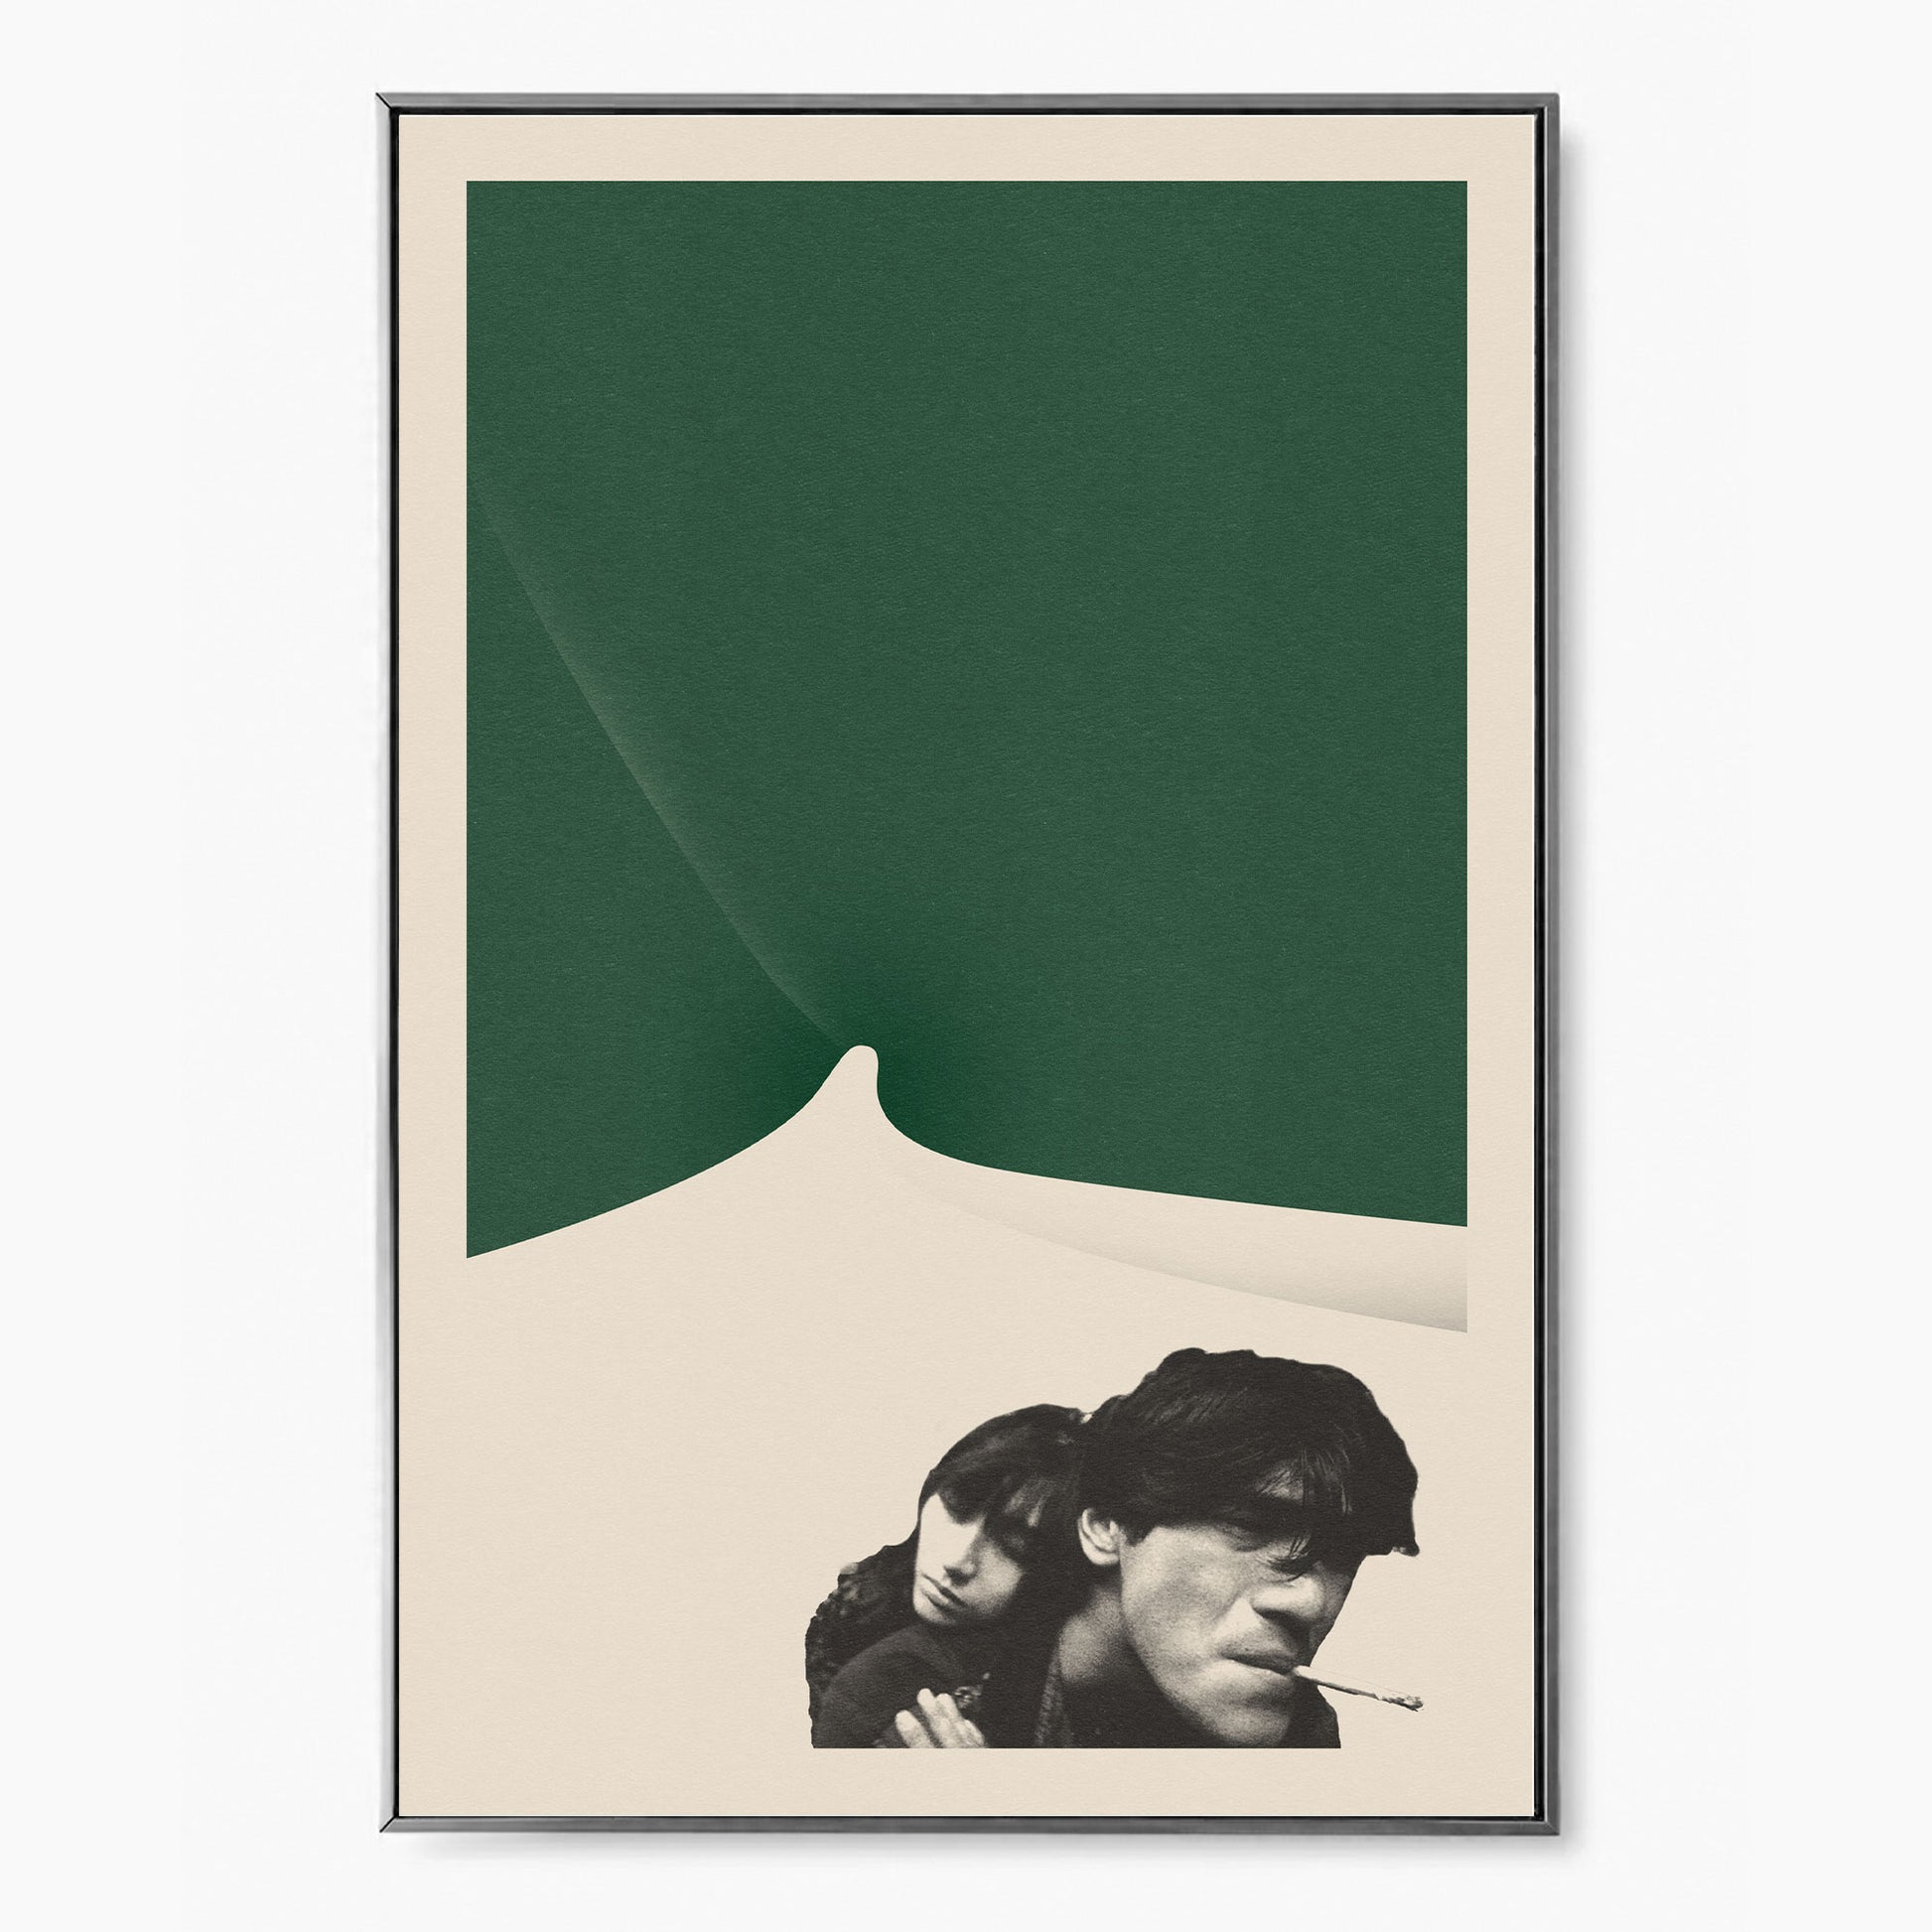 A thewallflowerclub's Fallen Angels movie print as a special gift featuring a man and a woman.